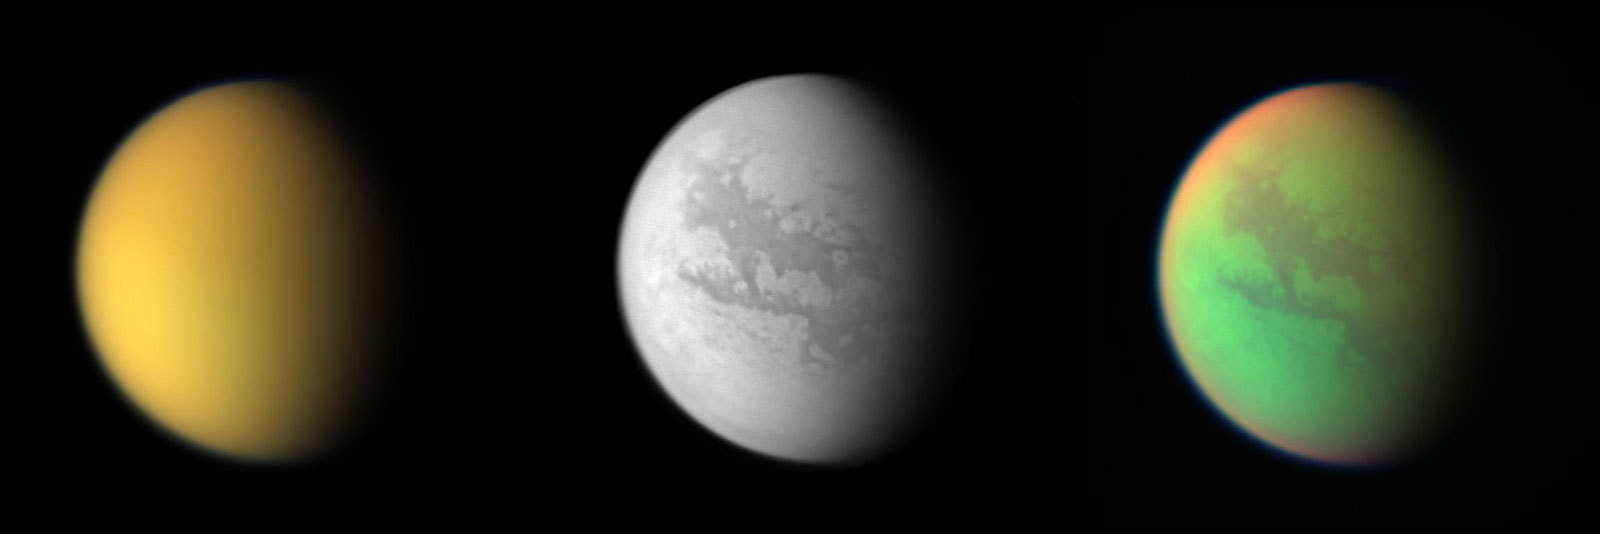 Trio of full disc views showing both interior how different spectrums can reveal feature's under Titan's perpetual clouds.